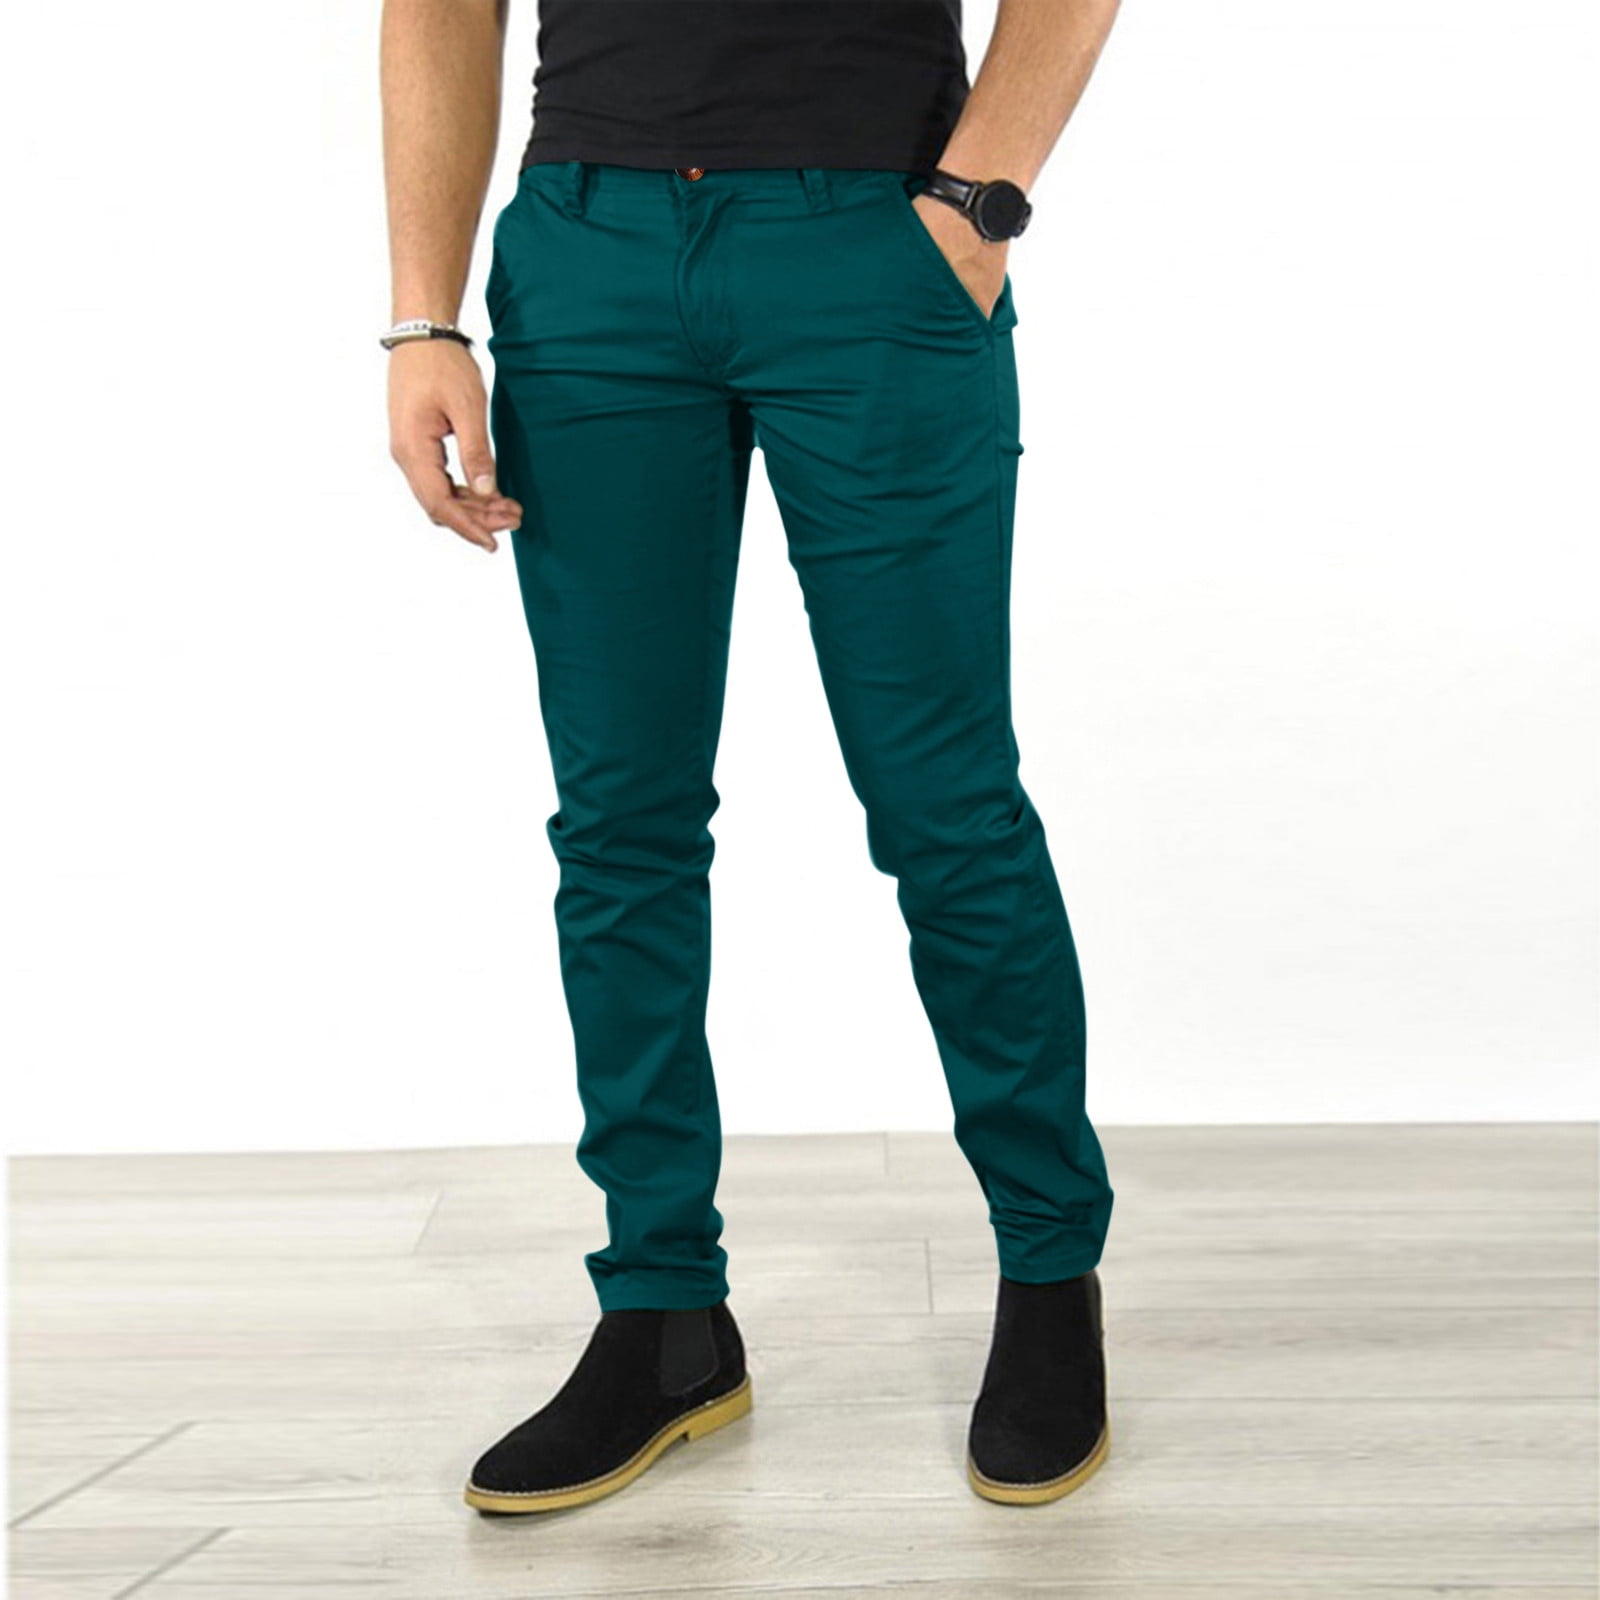 Green Sweatpants For Men Male Casual Business Solid Slim Pants Zipper Fly  Pocket Cropped Pencil Pant Trousers